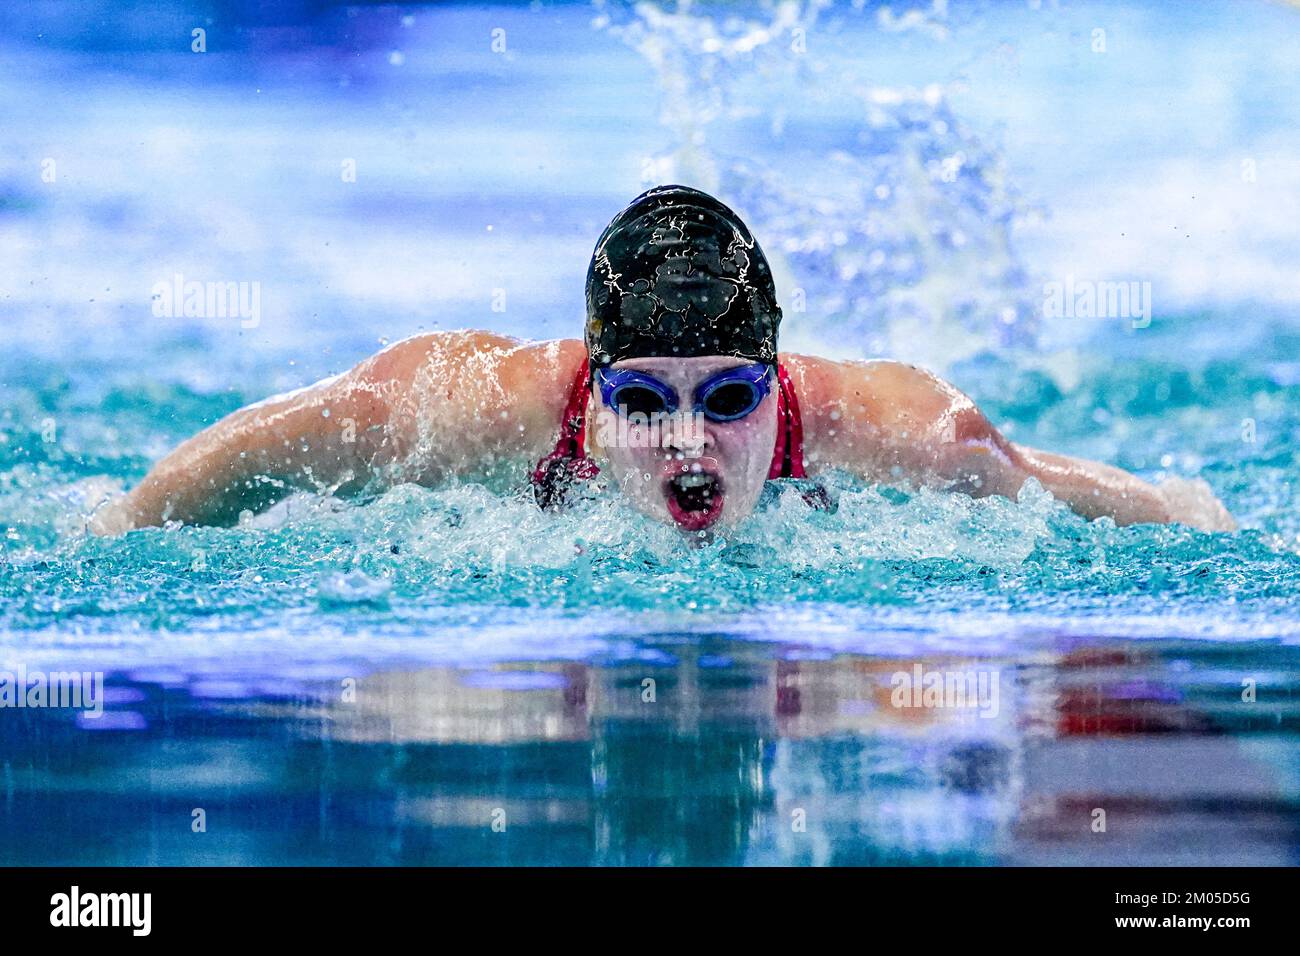 ROTTERDAM, NETHERLANDS - DECEMBER 4: Milou van Winkel competing in the Women, 50m Butterfly, Finals during the RQM Rotterdam Qualification Meet - Day 4 at Zwemcentrum Rotterdam on December 4, 2022 in Rotterdam, Netherlands (Photo by Jeroen Meuwsen/Orange Pictures) Stock Photo